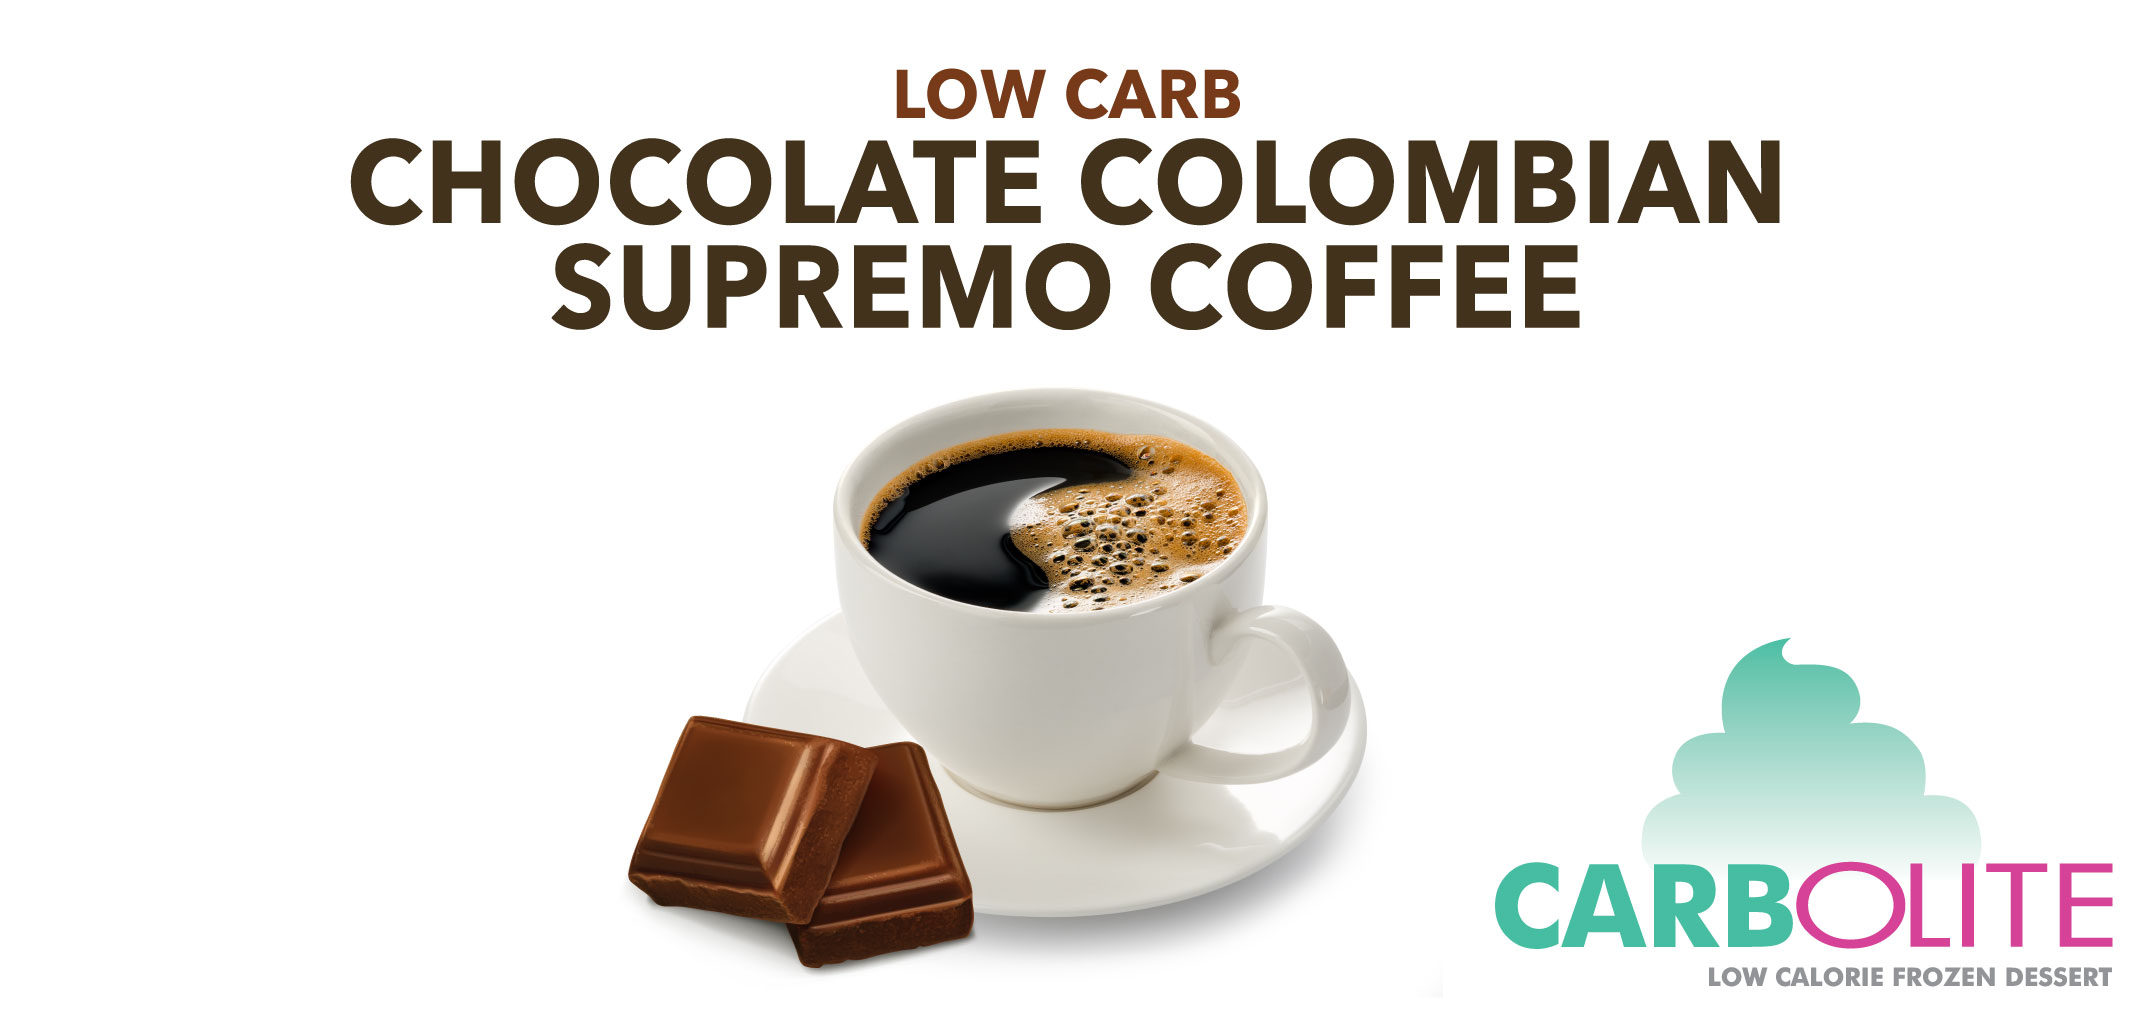 carbolite low carb no sugar added chocolate colombian supremo coffee label image